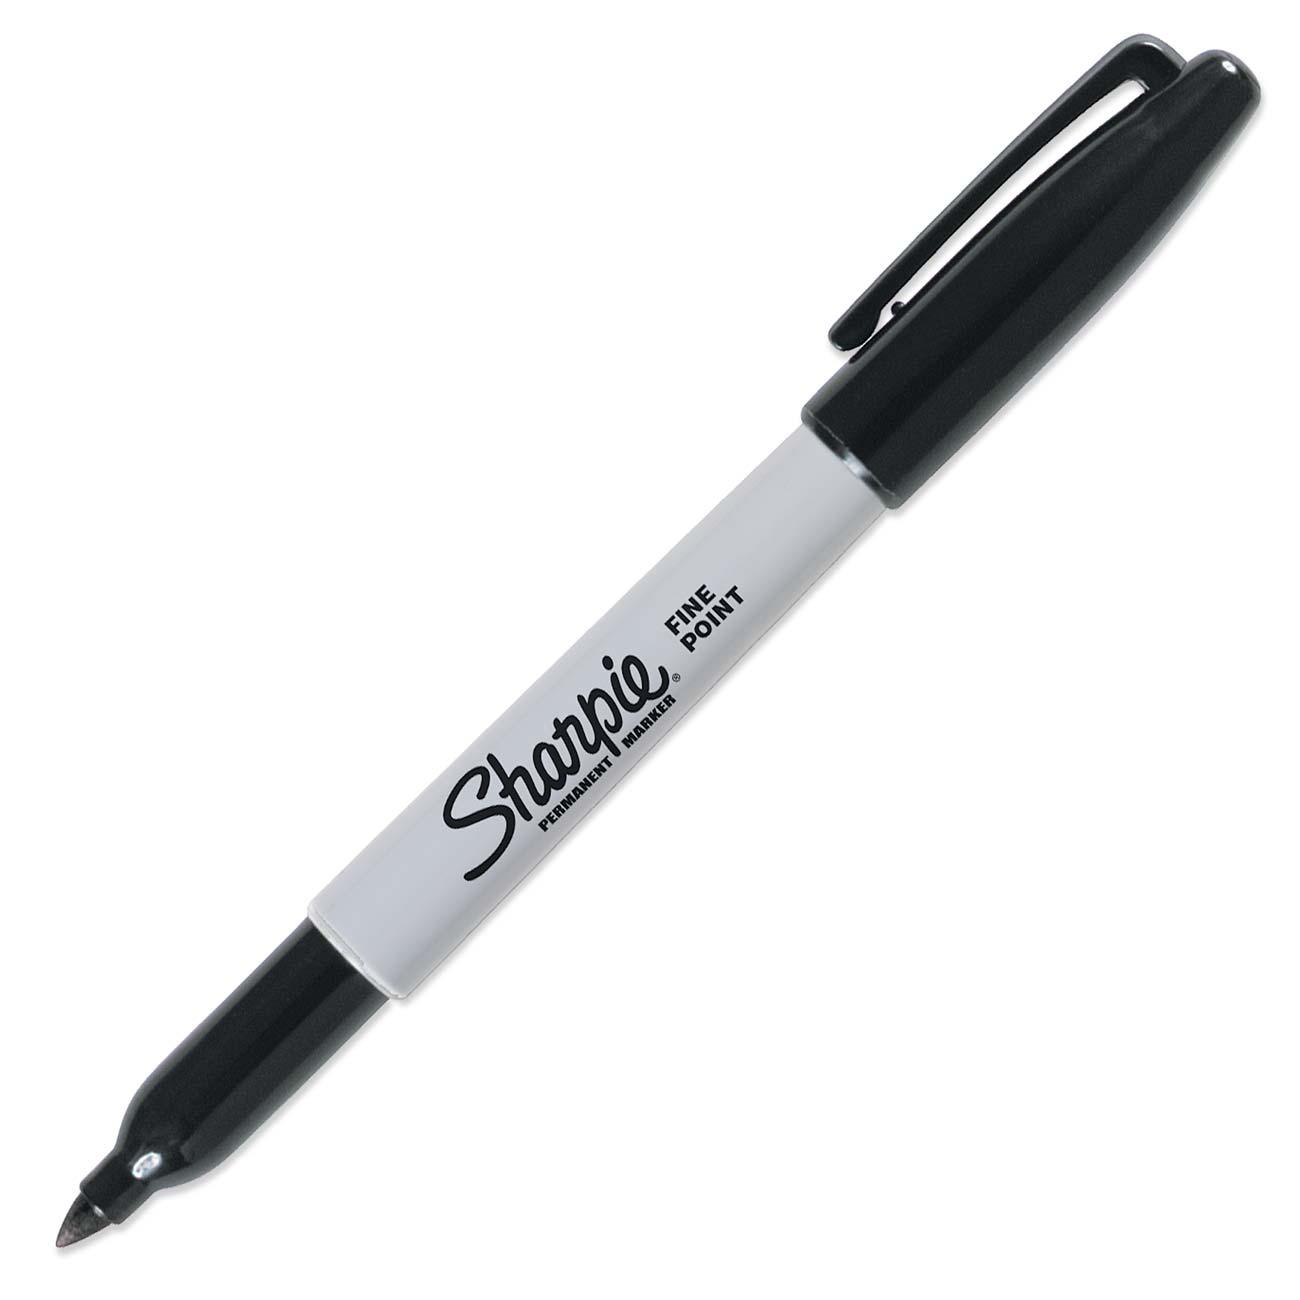 Sharpie, for the crazy old coot in your life Blank Meme Template